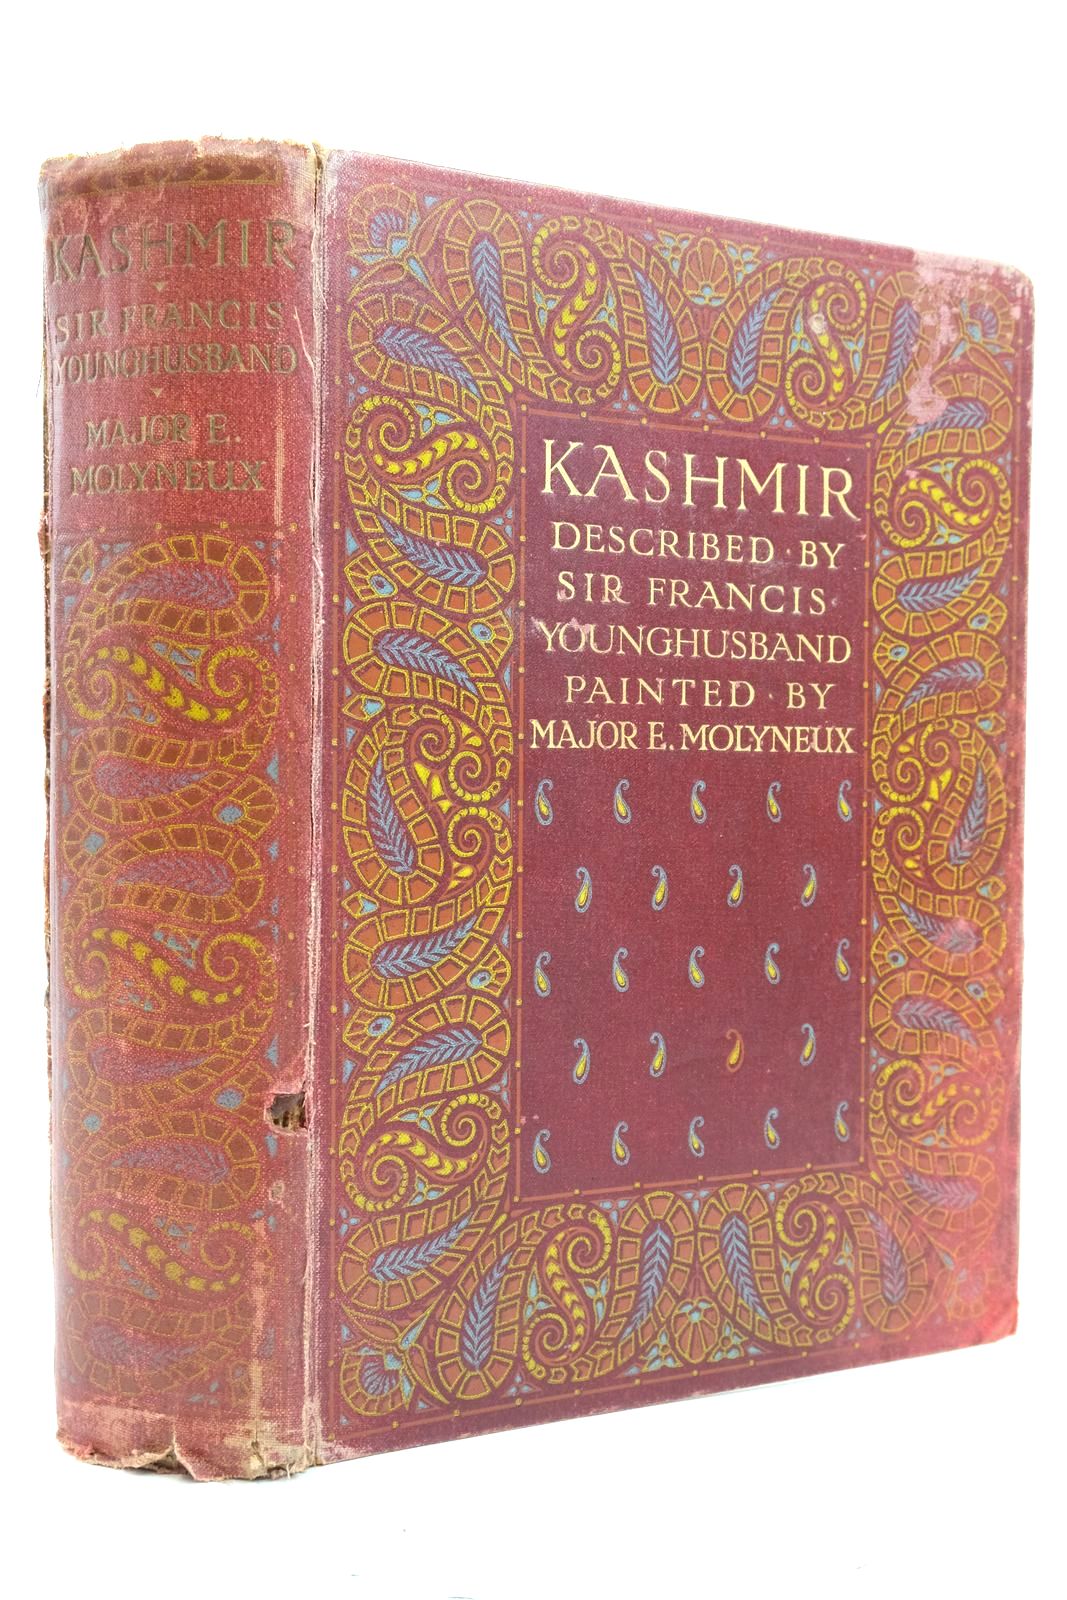 Photo of KASHMIR written by Younghusband, Francis illustrated by Molyneux, E. published by A. &amp; C. Black Ltd. (STOCK CODE: 2137173)  for sale by Stella & Rose's Books